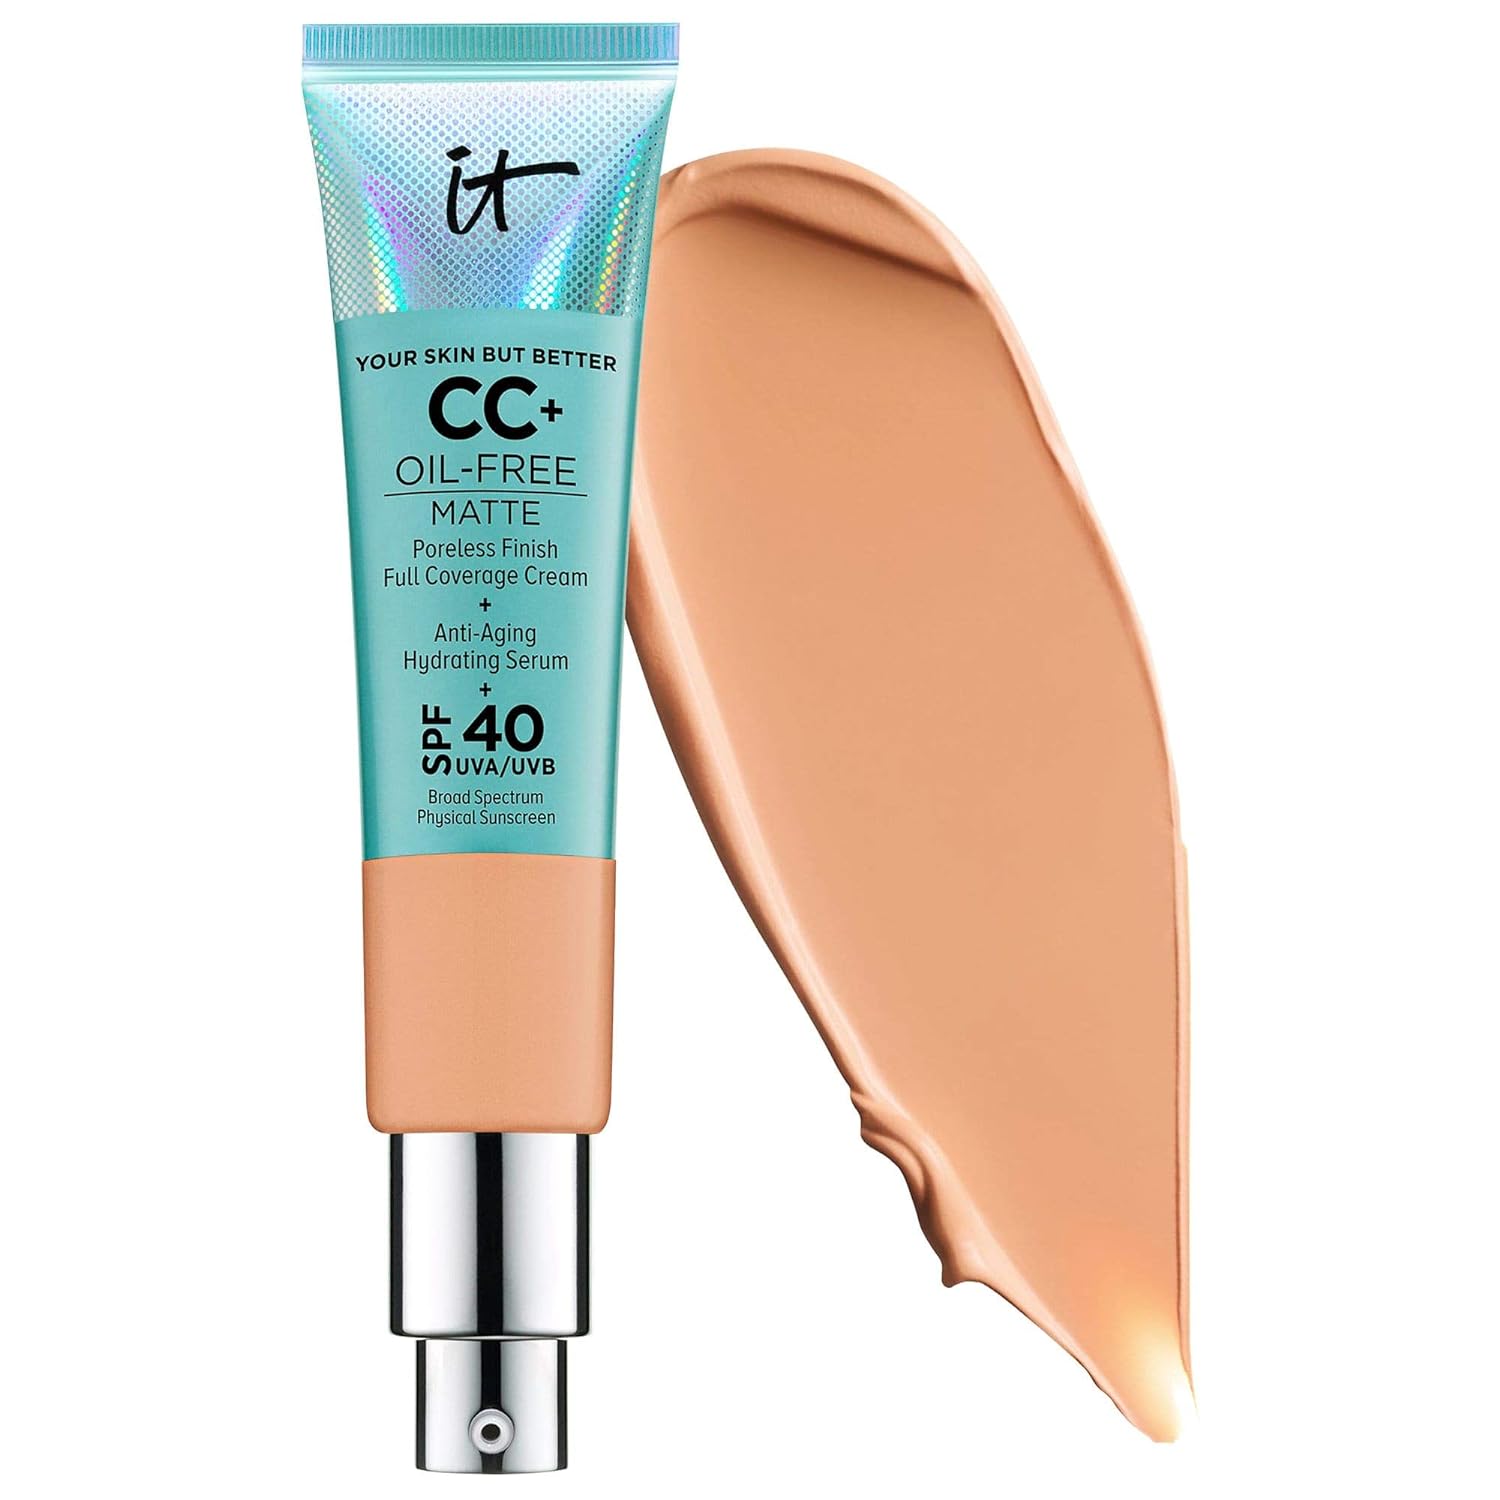  It Cosmetics Your Skin But Better CC Cream Oil-Free Matte with SPF 40 - Neutral Tan